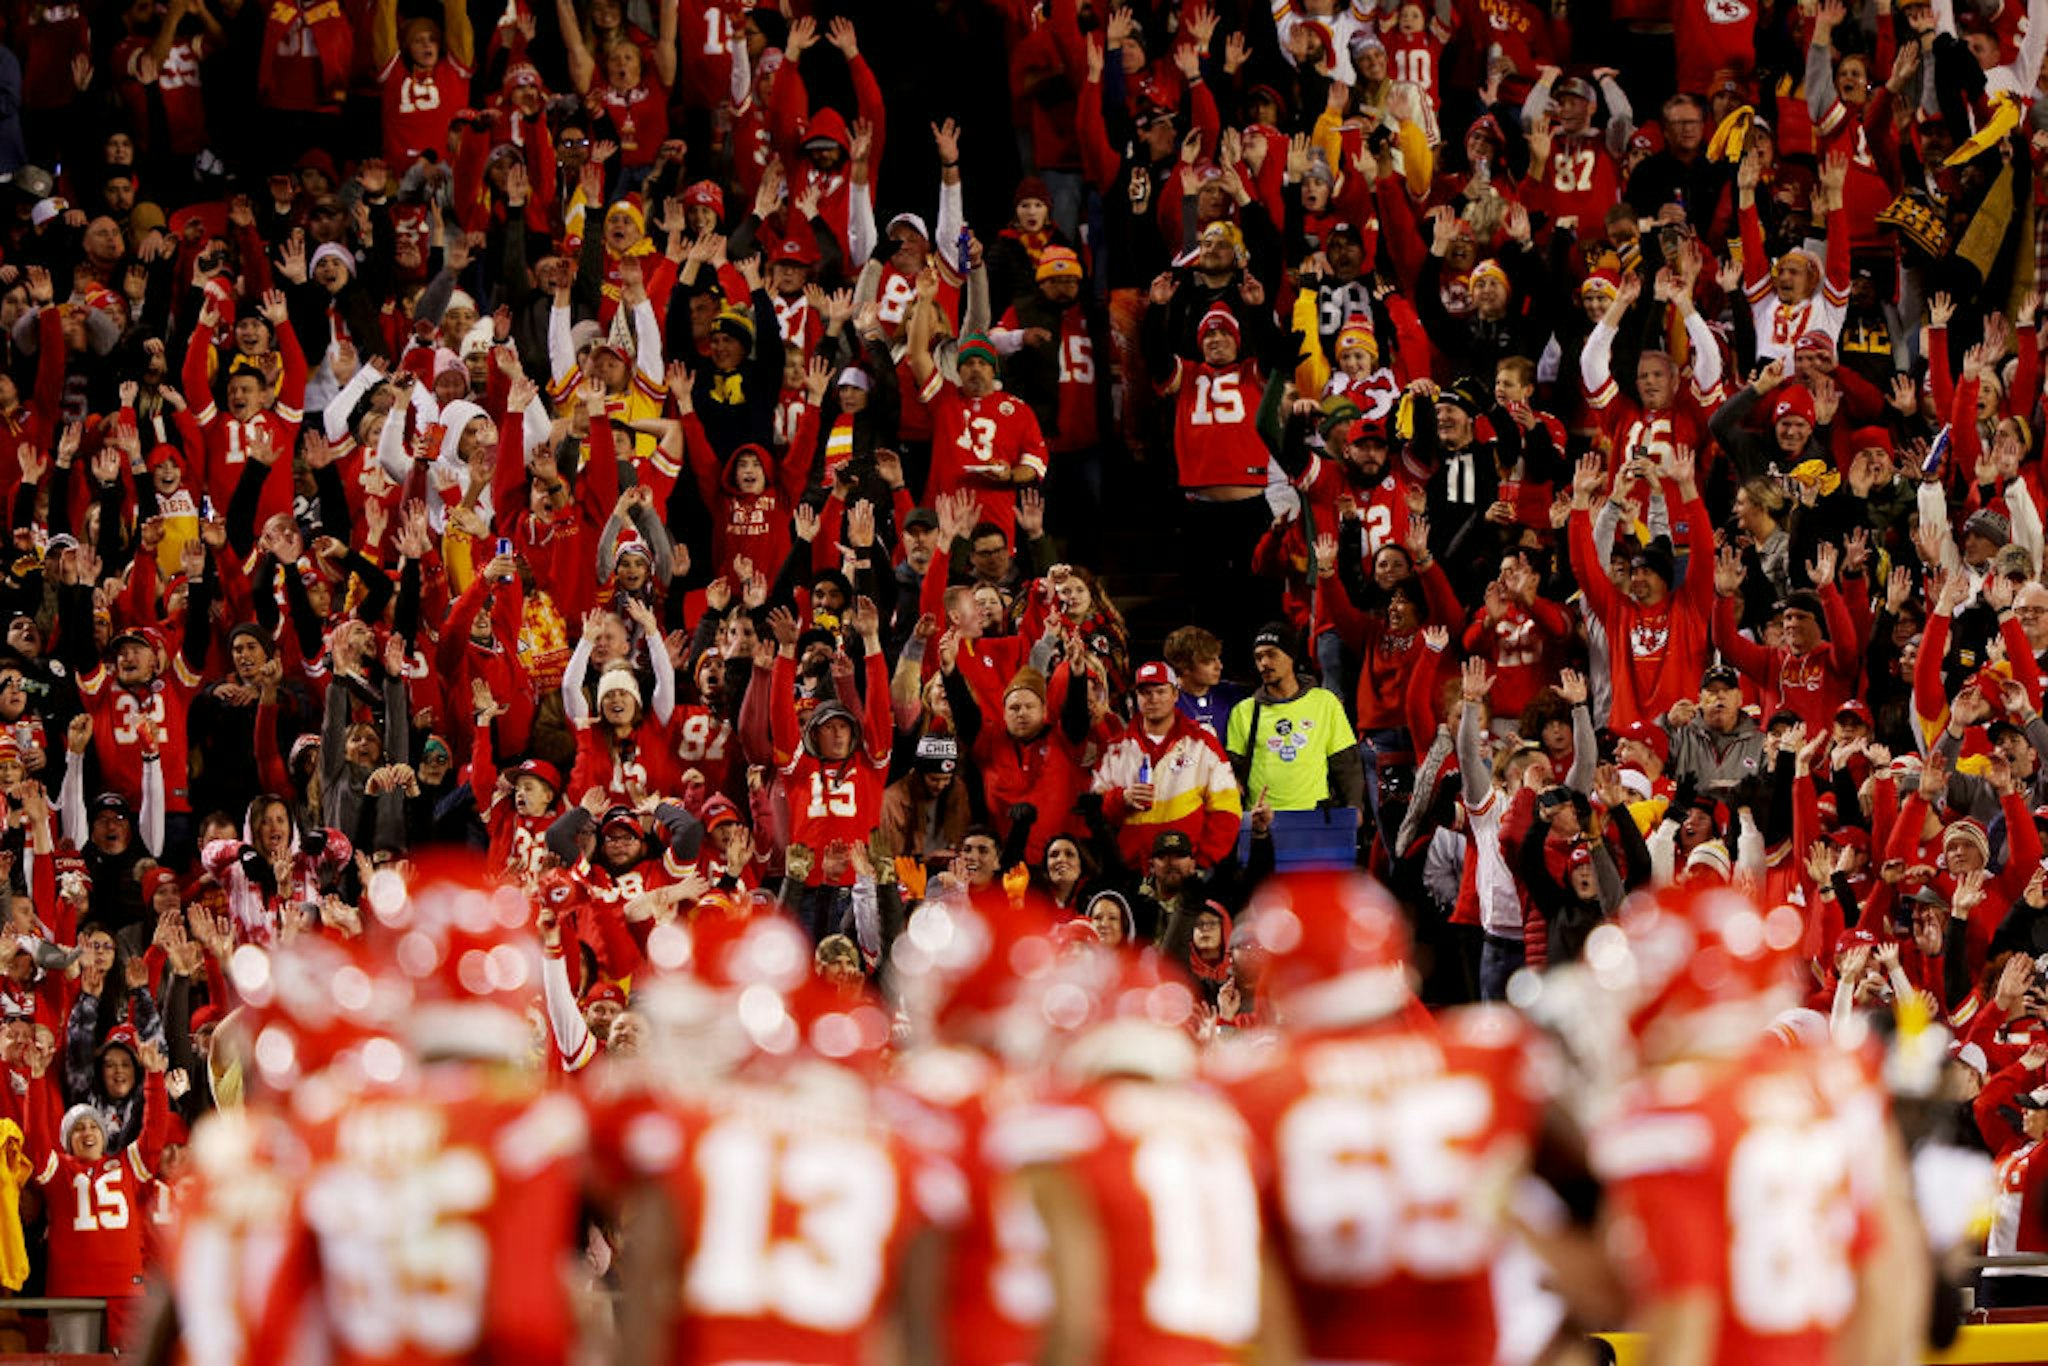 KANSAS CITY, MISSOURI - DECEMBER 26: Kansas City Chiefs fans do the wave during the third quarter in the game against the Pittsburgh Steelers at Arrowhead Stadium on December 26, 2021 in Kansas City, Missouri. (Photo by Jamie Squire/Getty Images)